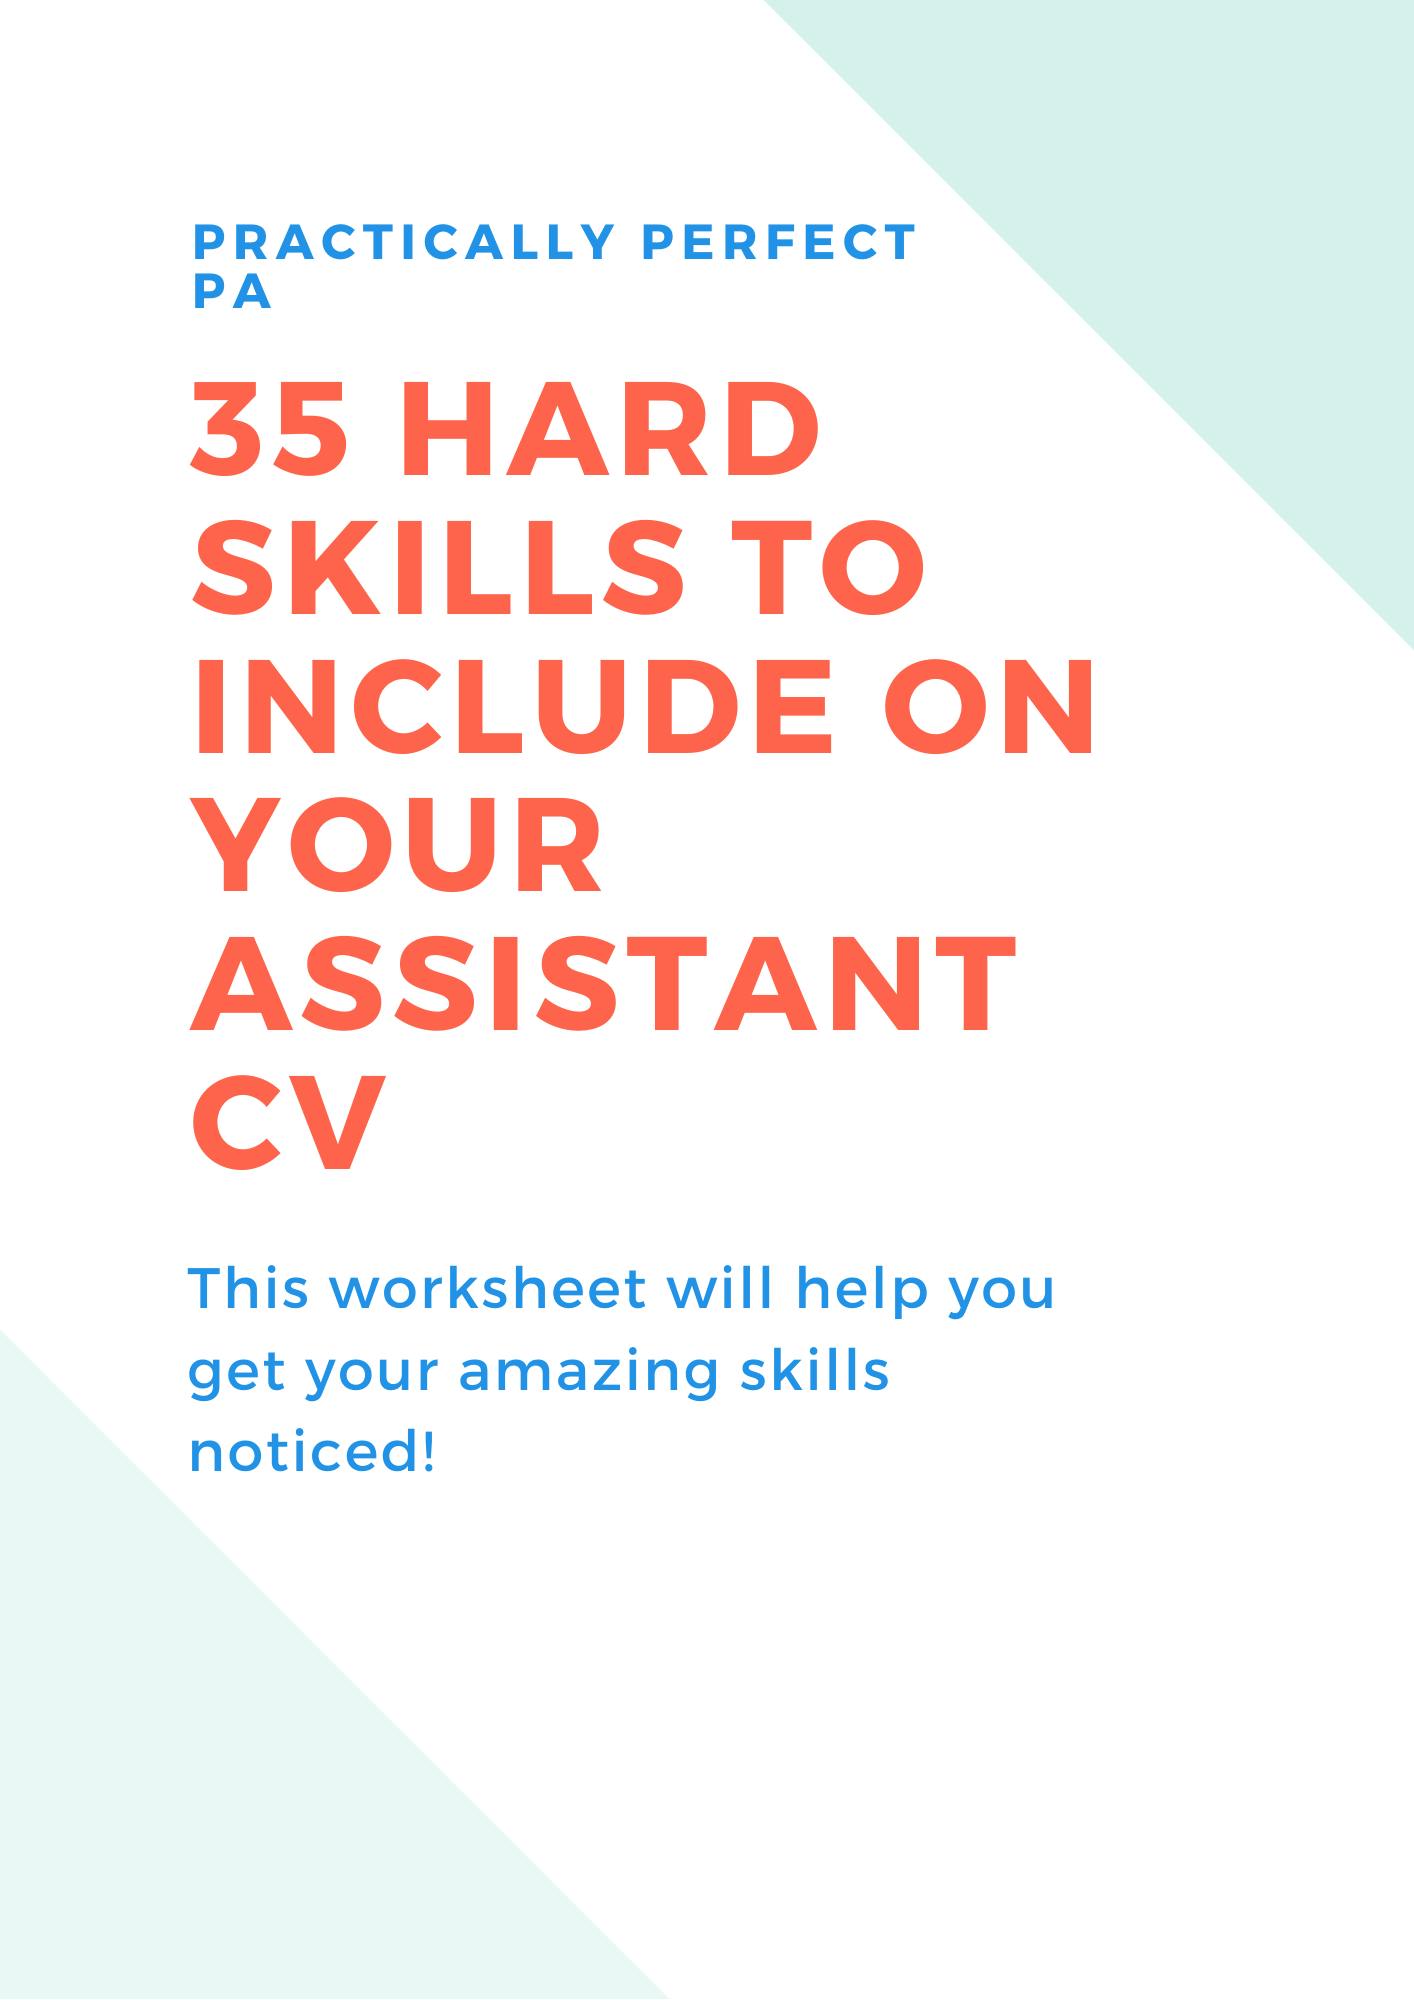 35 hard skills to include on your Assistant CV